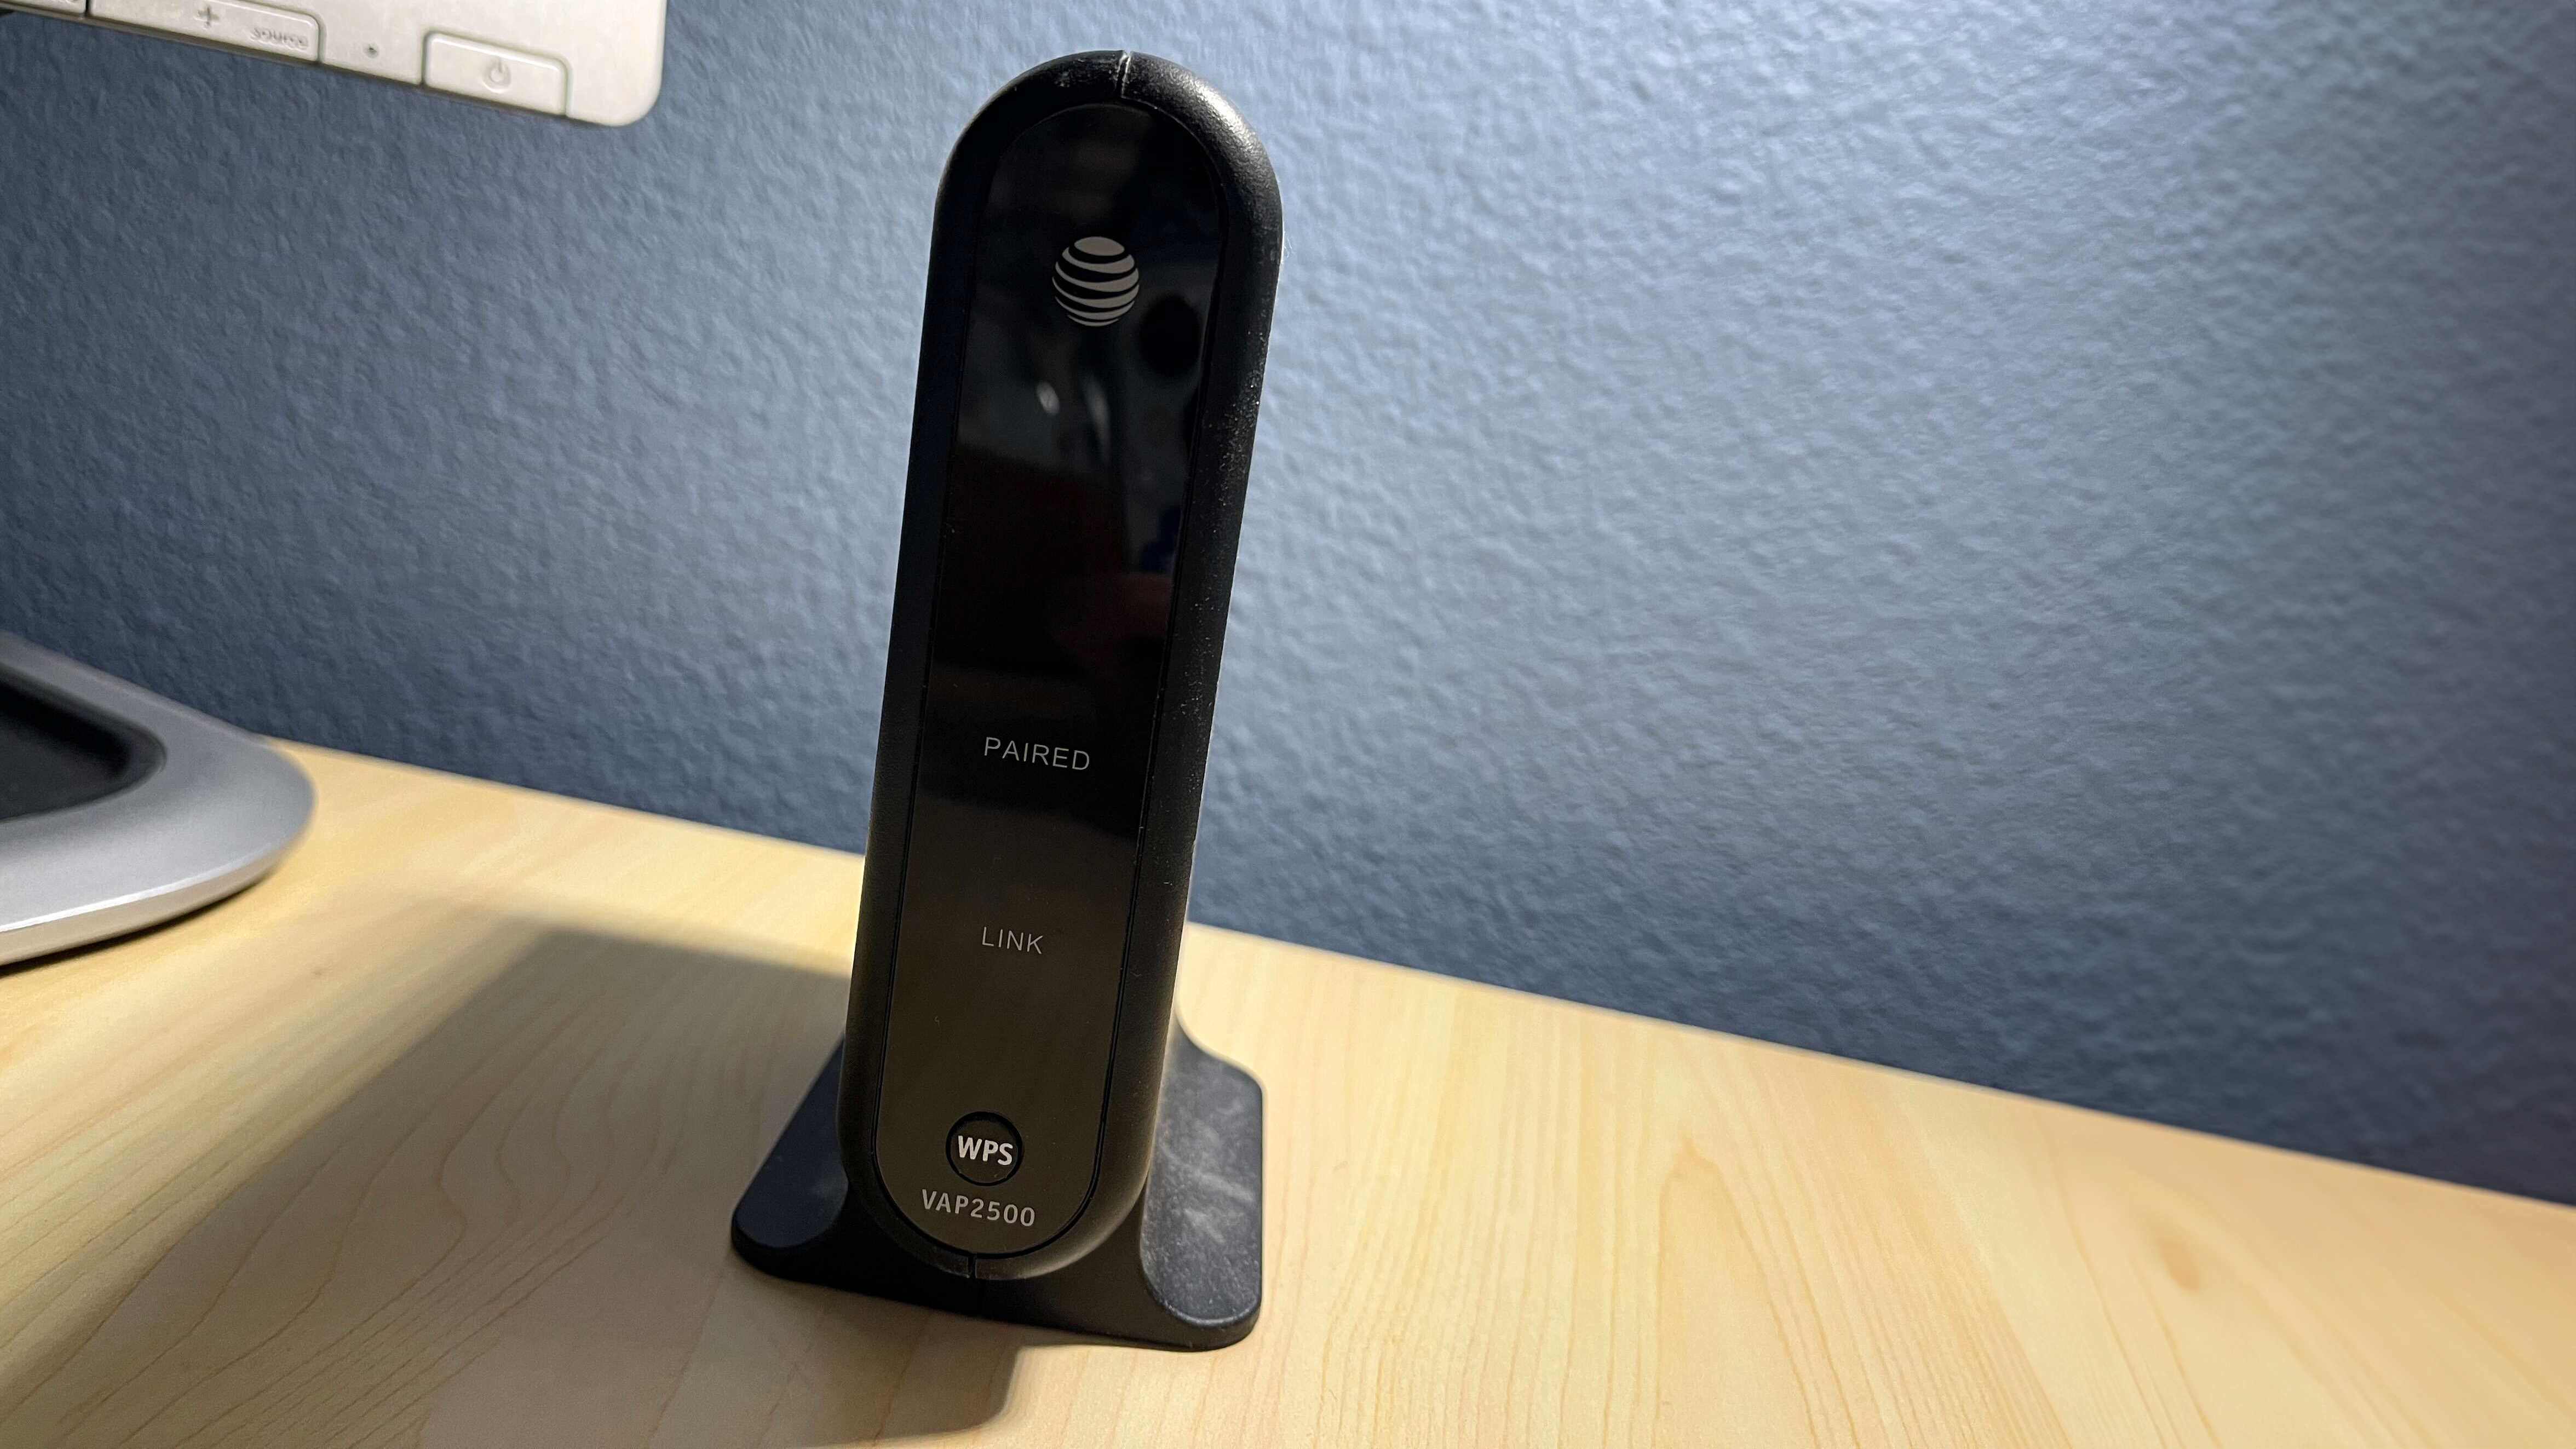 AT&T modem and router sitting on a desktop counter with no lights